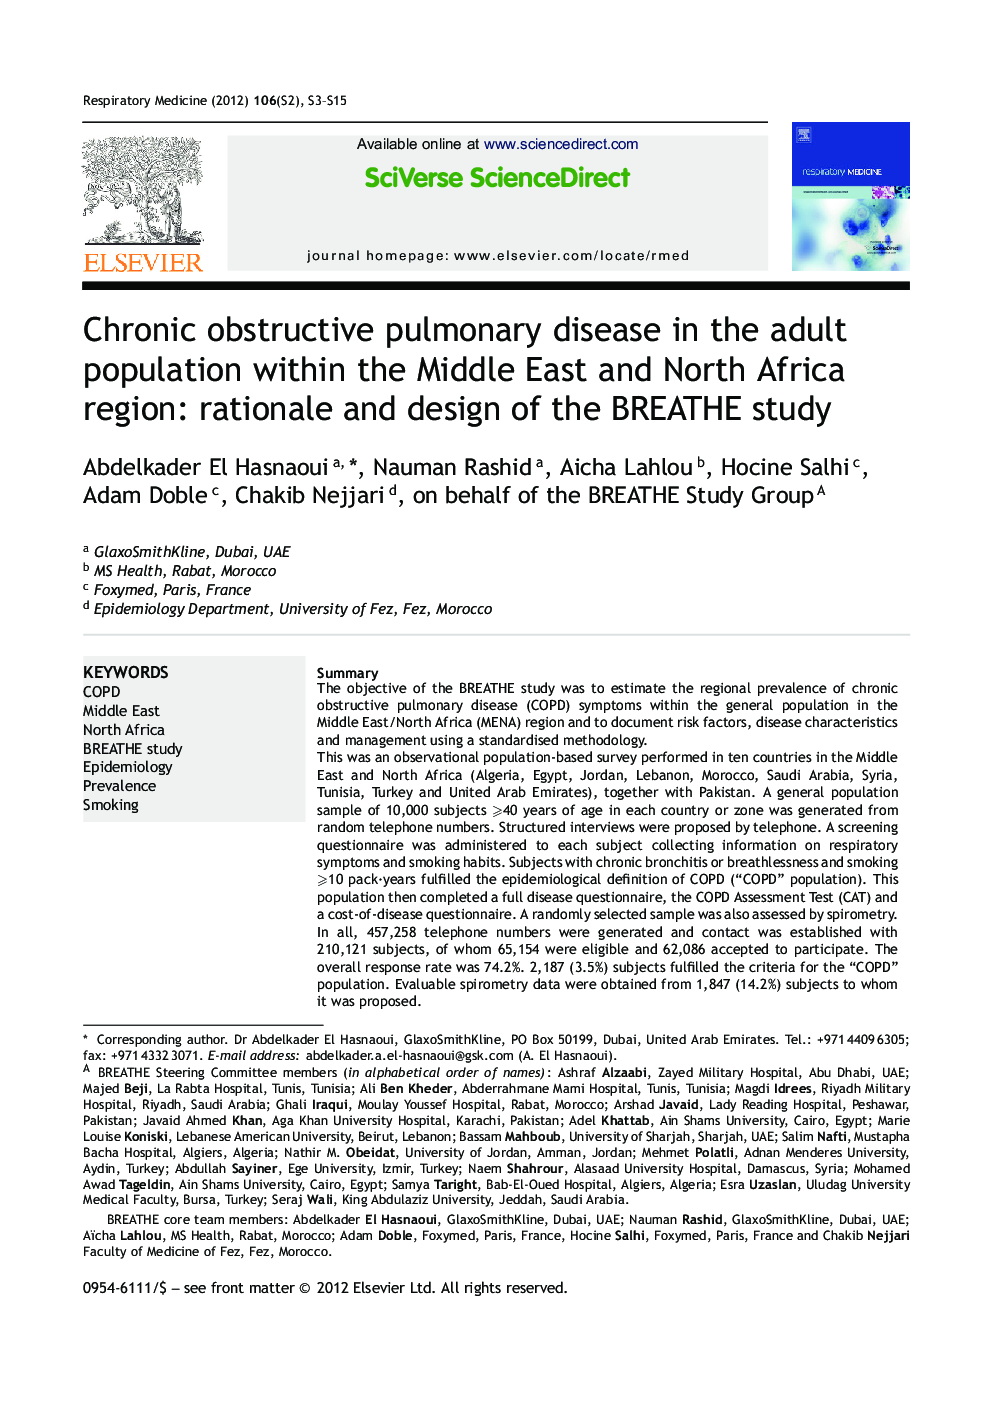 Chronic obstructive pulmonary disease in the adult population within the Middle East and North Africa region: rationale and design of the BREATHE study 